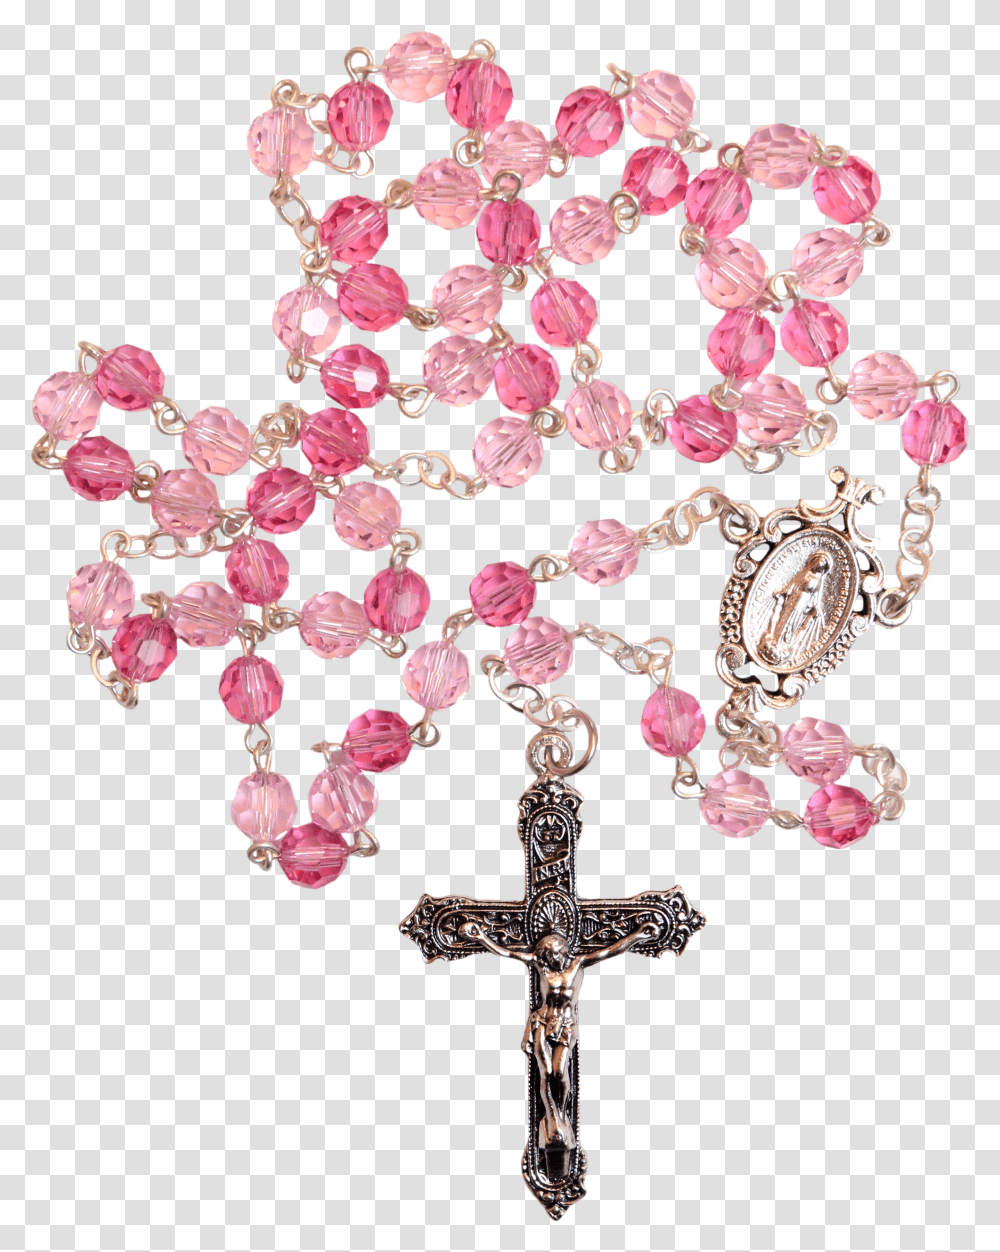 Item Pink Crystal Gold Rosary 2069x2608 Clipart Rosary Beads Background Transparent Png